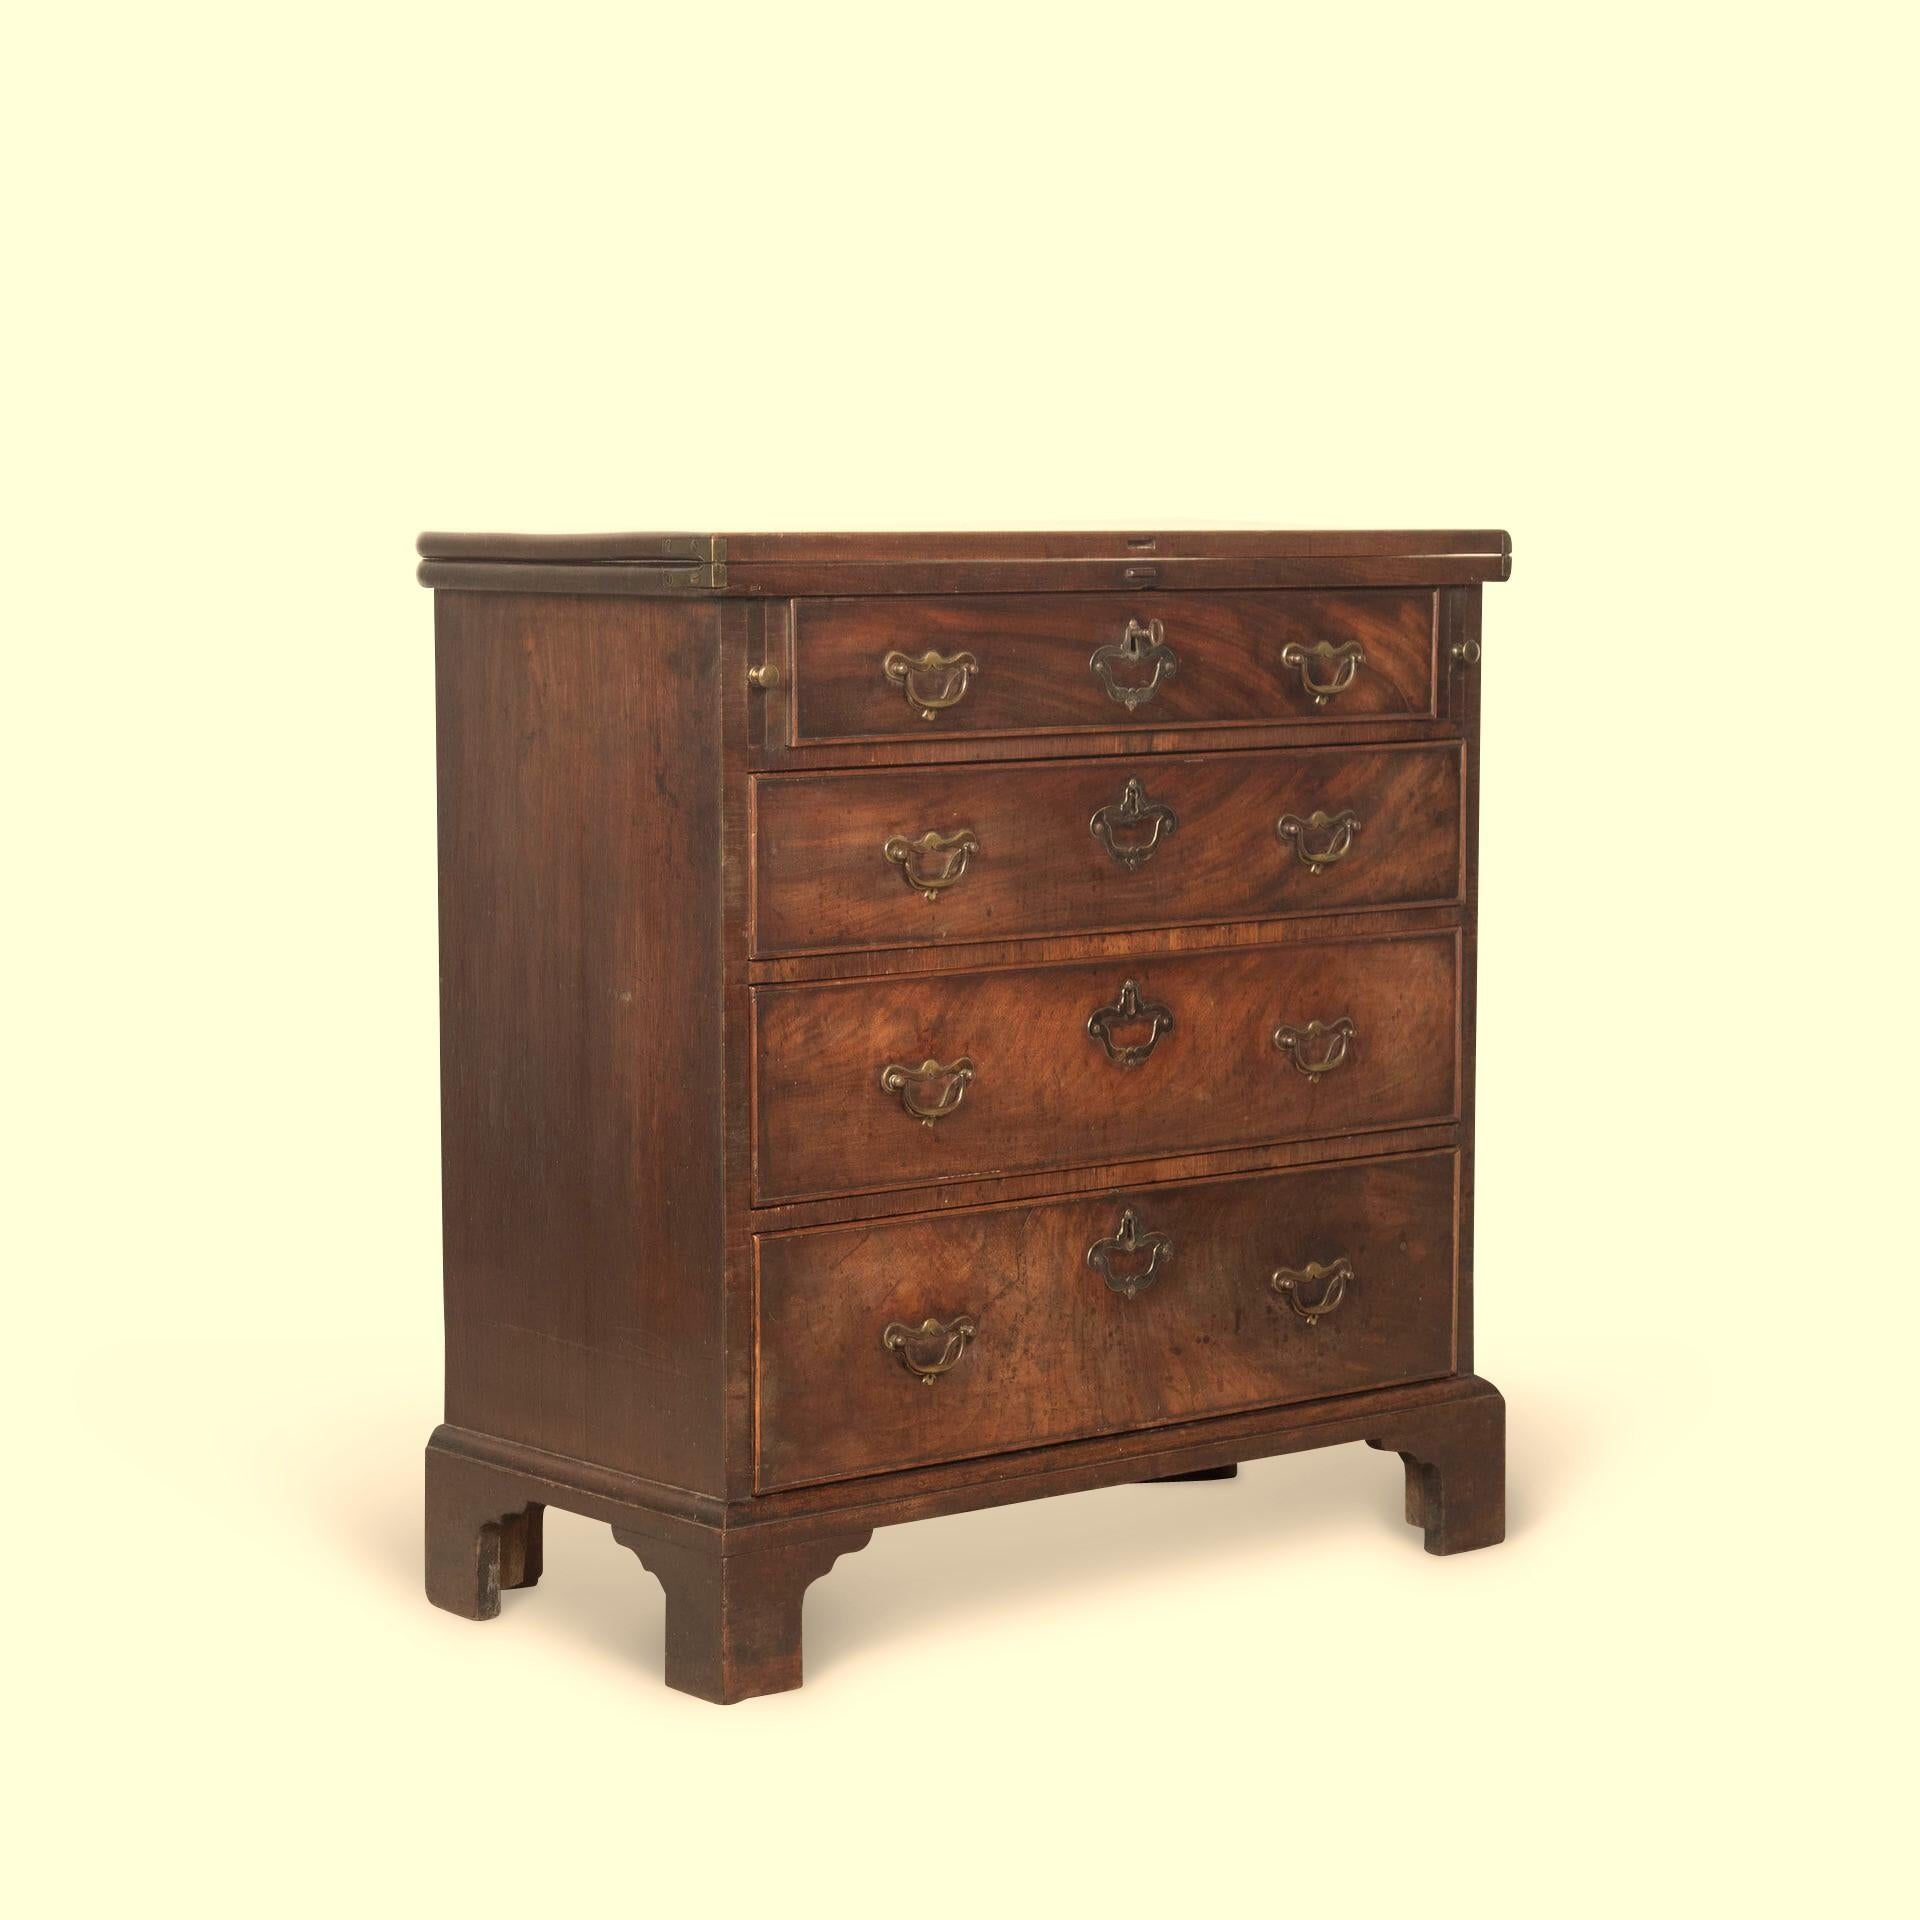 ﻿ A rare Geo III mahogany bachelors chest of small proportions, the fold over top with polished interior rests on pull out lopes, above an arrangement four graduating drawers with pierced brass handles and lock plates. All raised on bracket feet.